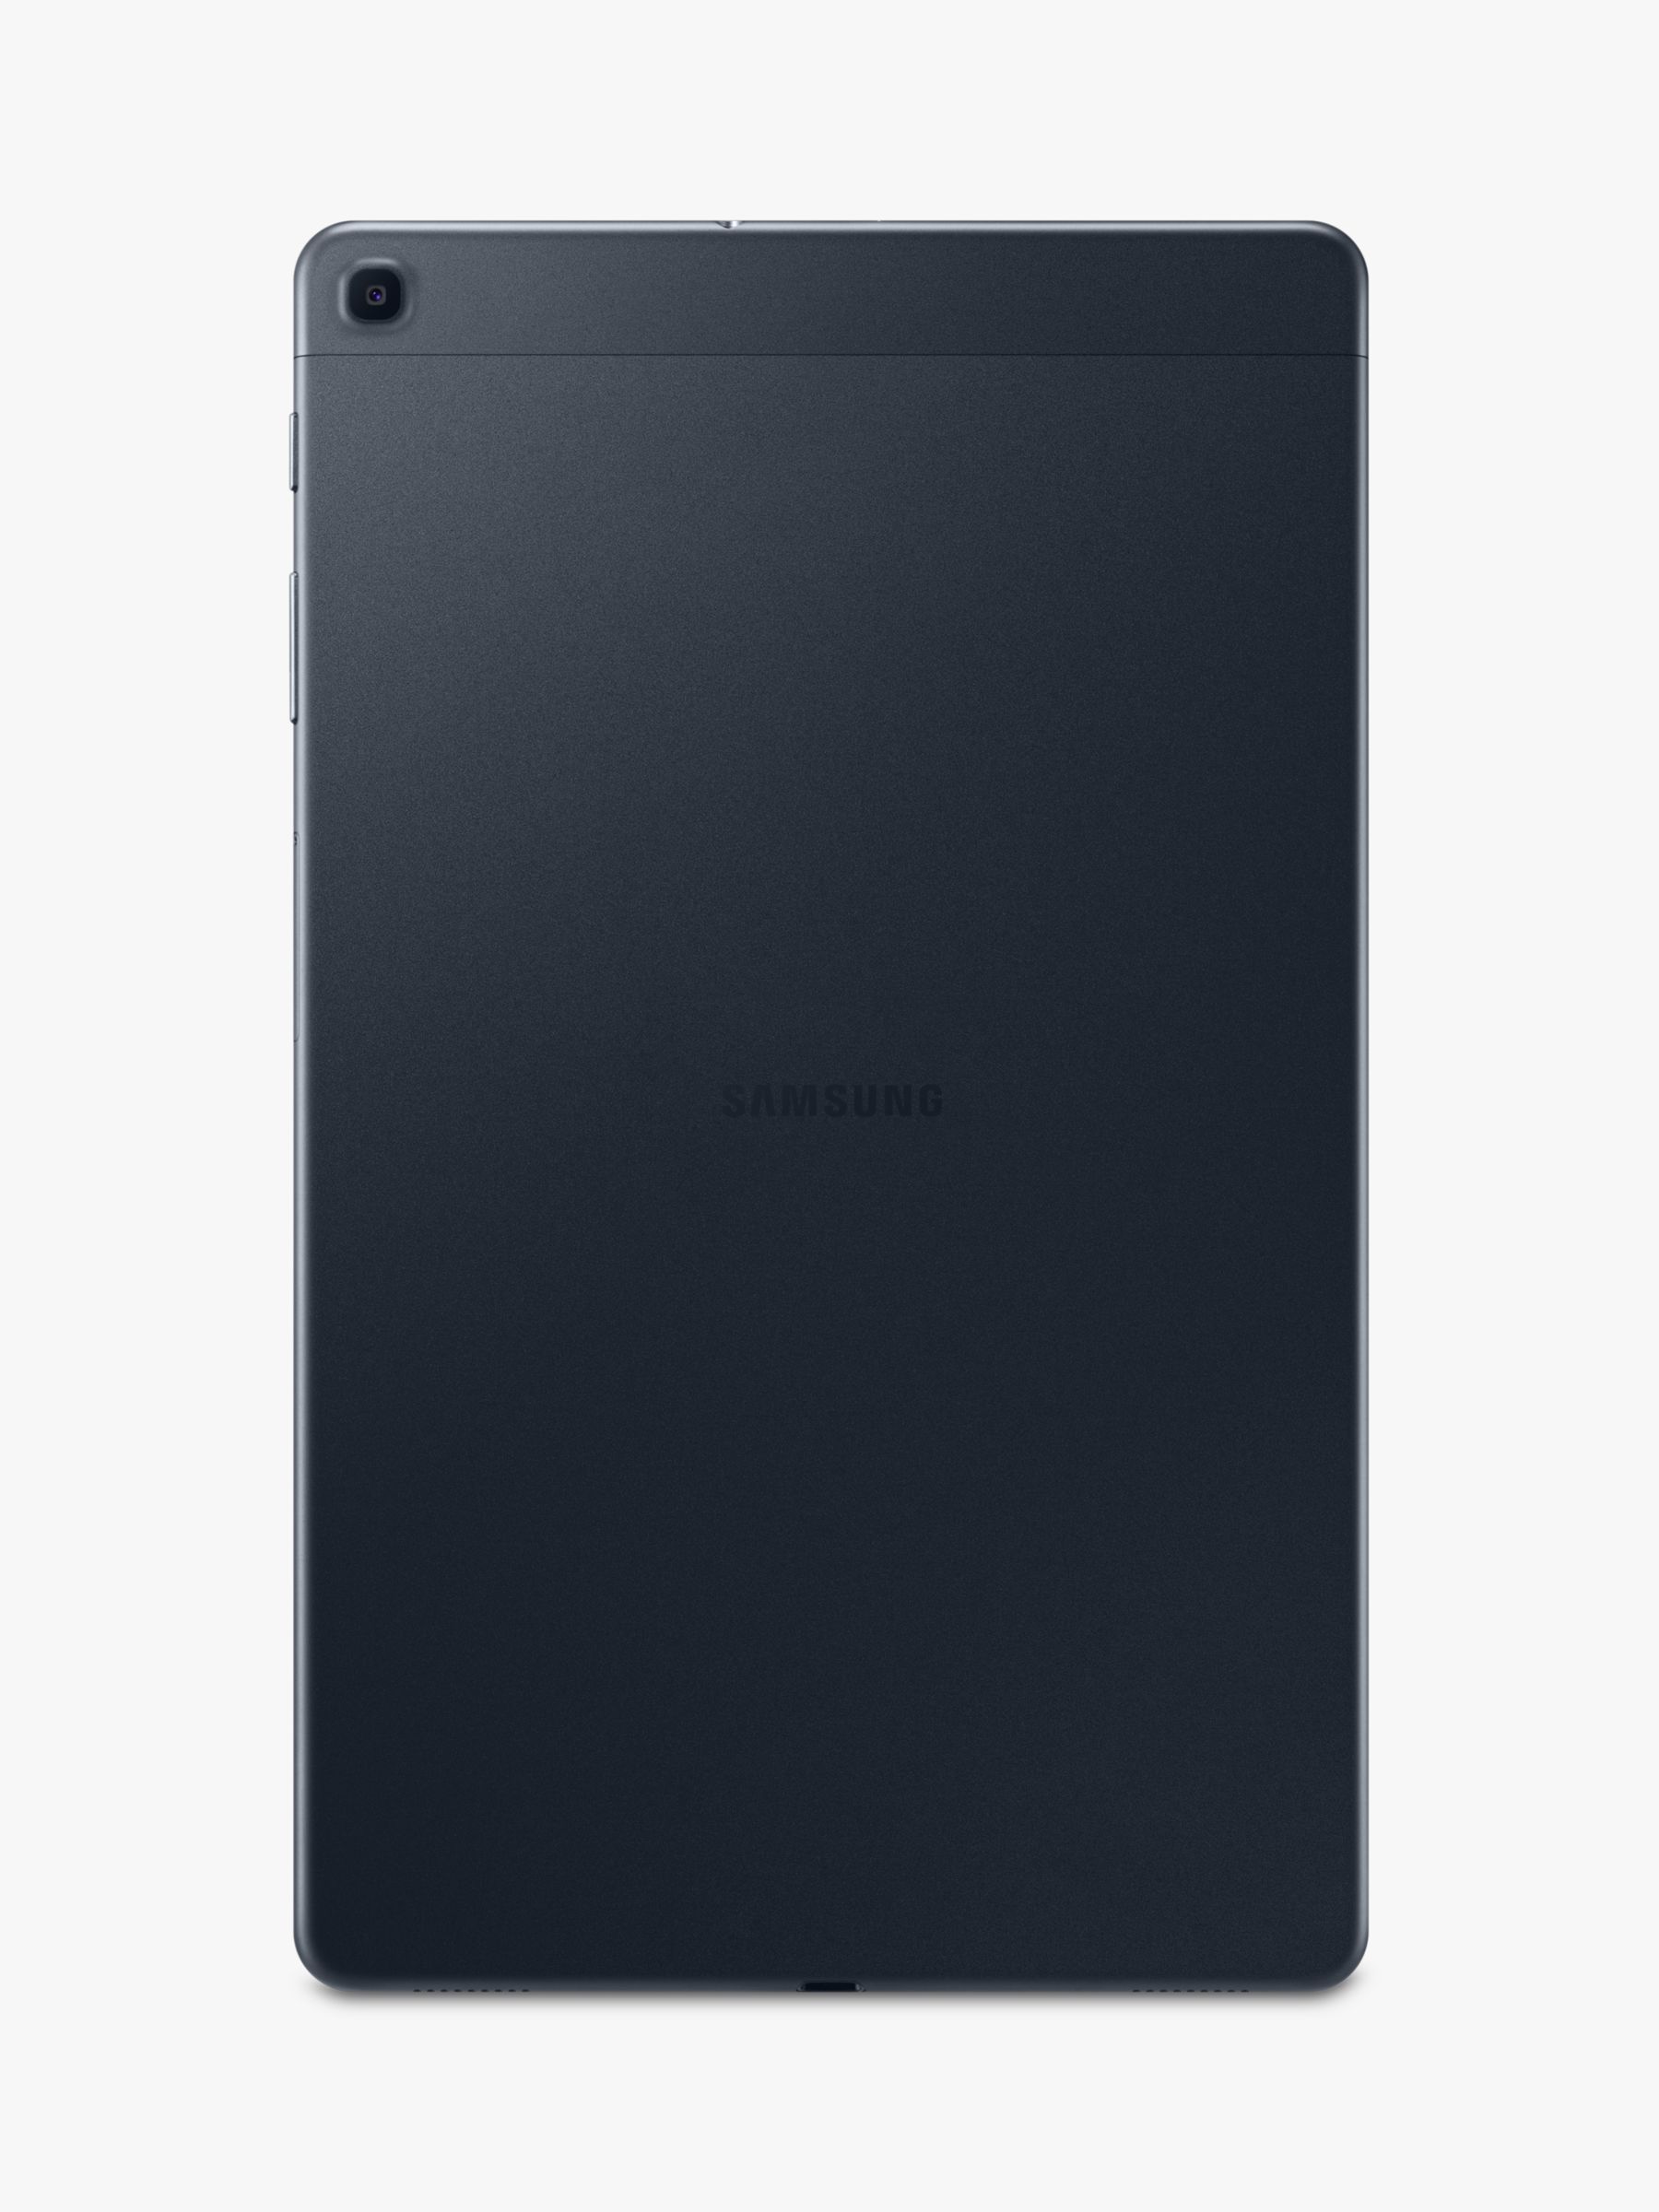 Samsung Galaxy Tab A (2019) 10.1&quot; Tablet, Android, 32GB, 2GB RAM, Wi-Fi at John Lewis & Partners